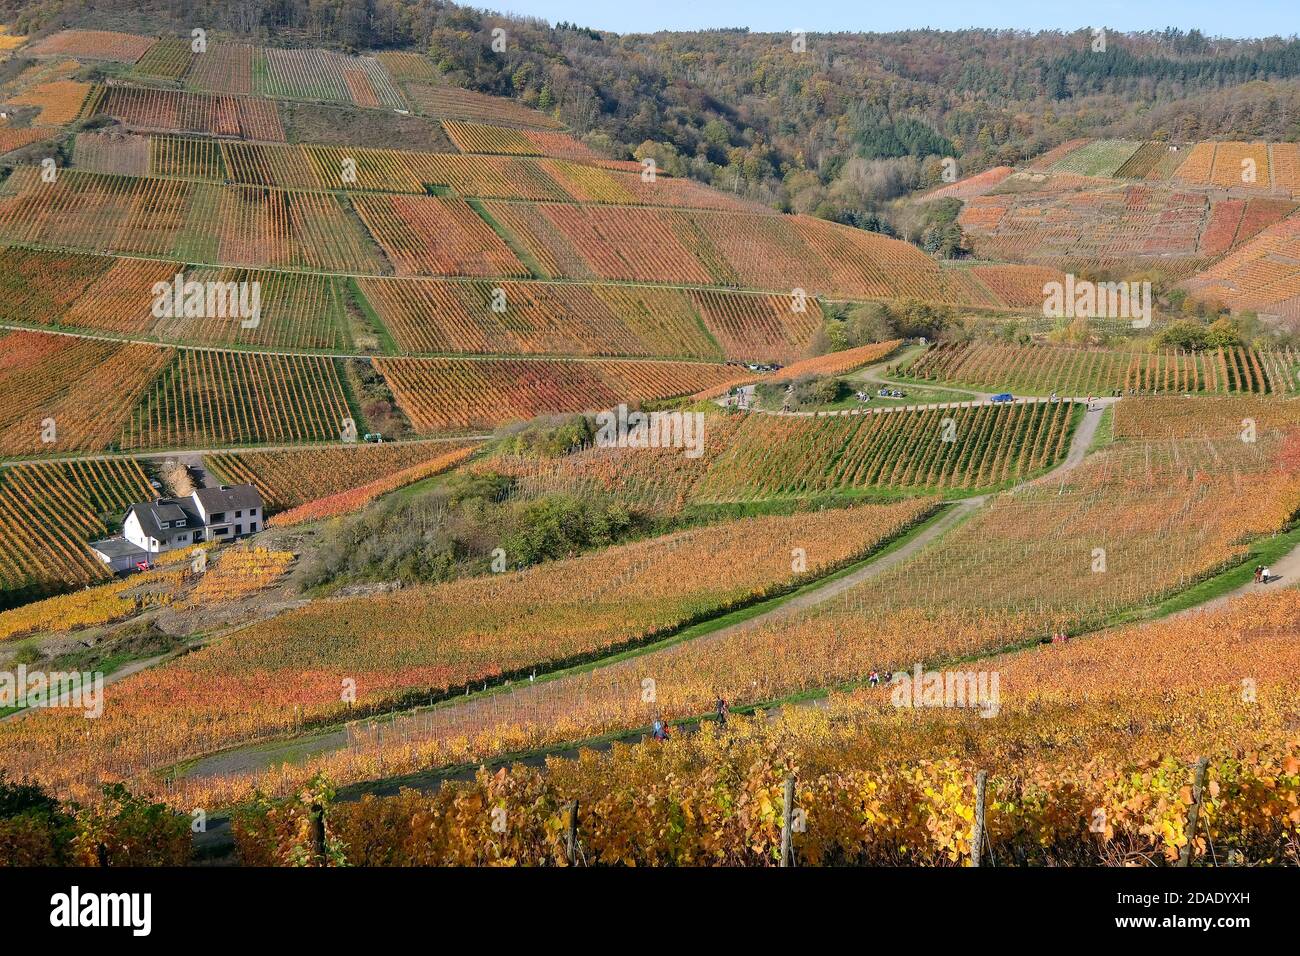 Colourful autumn atmosphere in the vineyards of the Ahr valley, Rhineland-Palatinate, Germany. Stock Photo